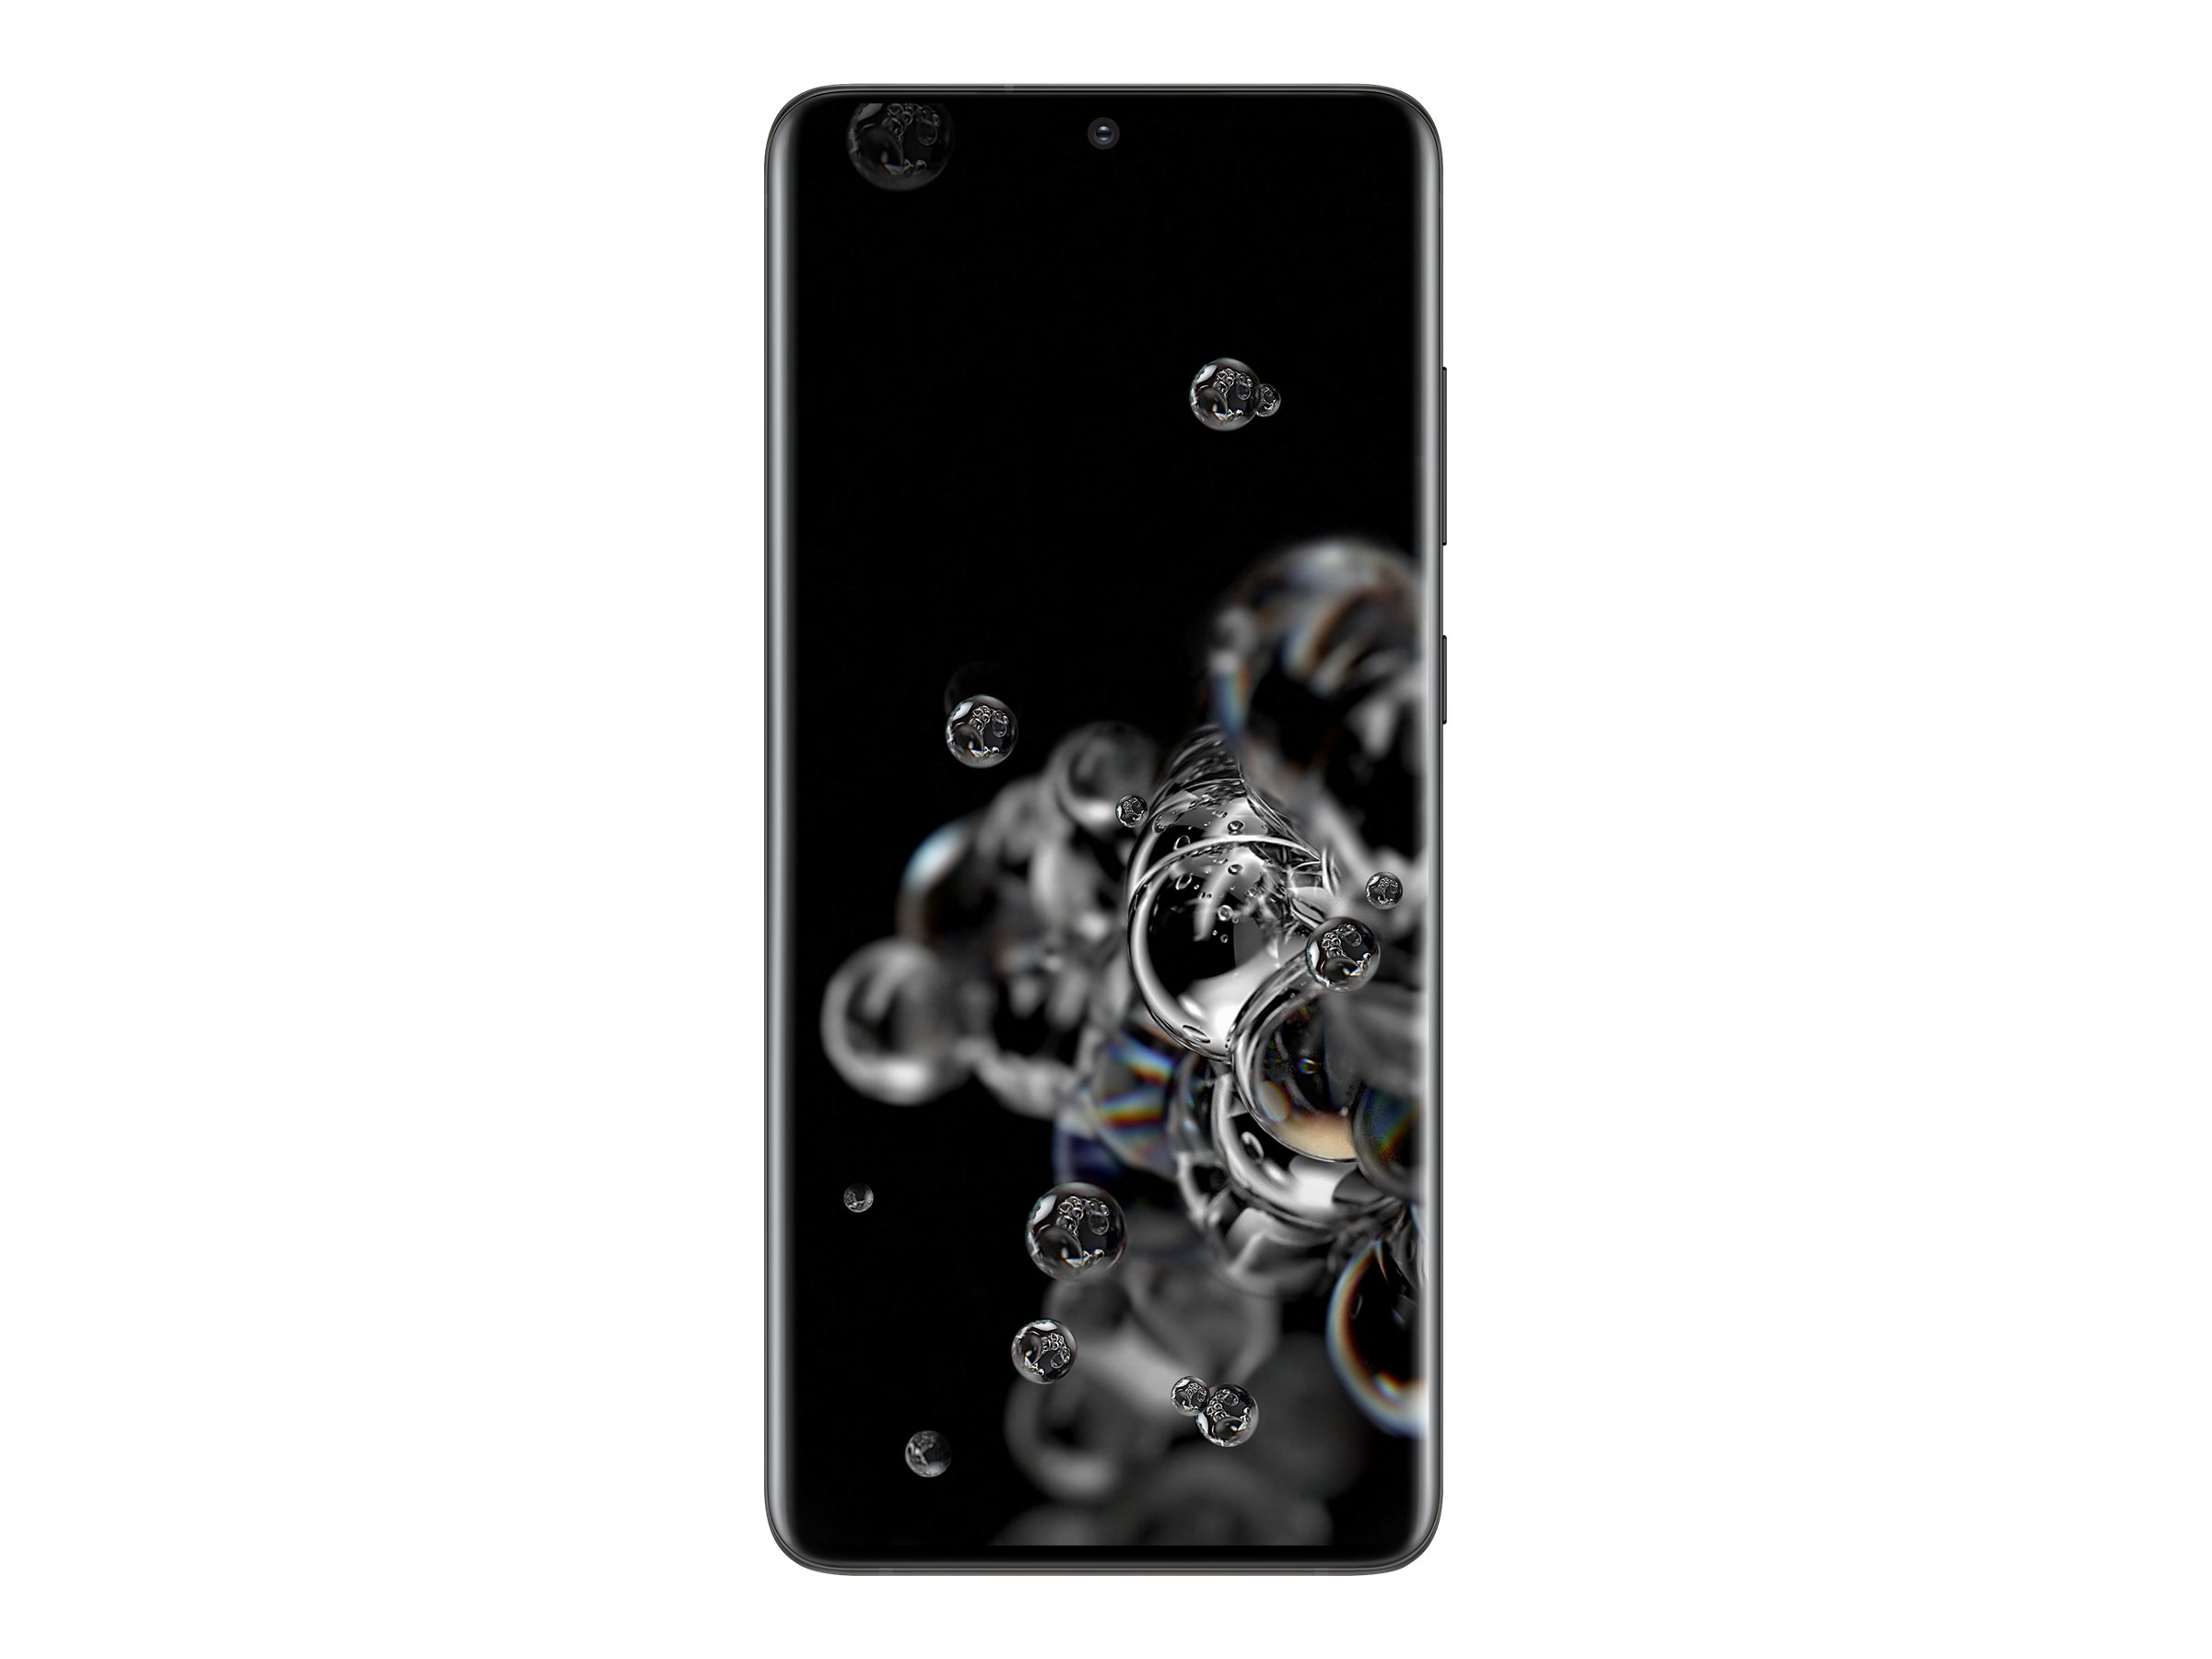 Huawei P40 lite 5G Technical Specifications